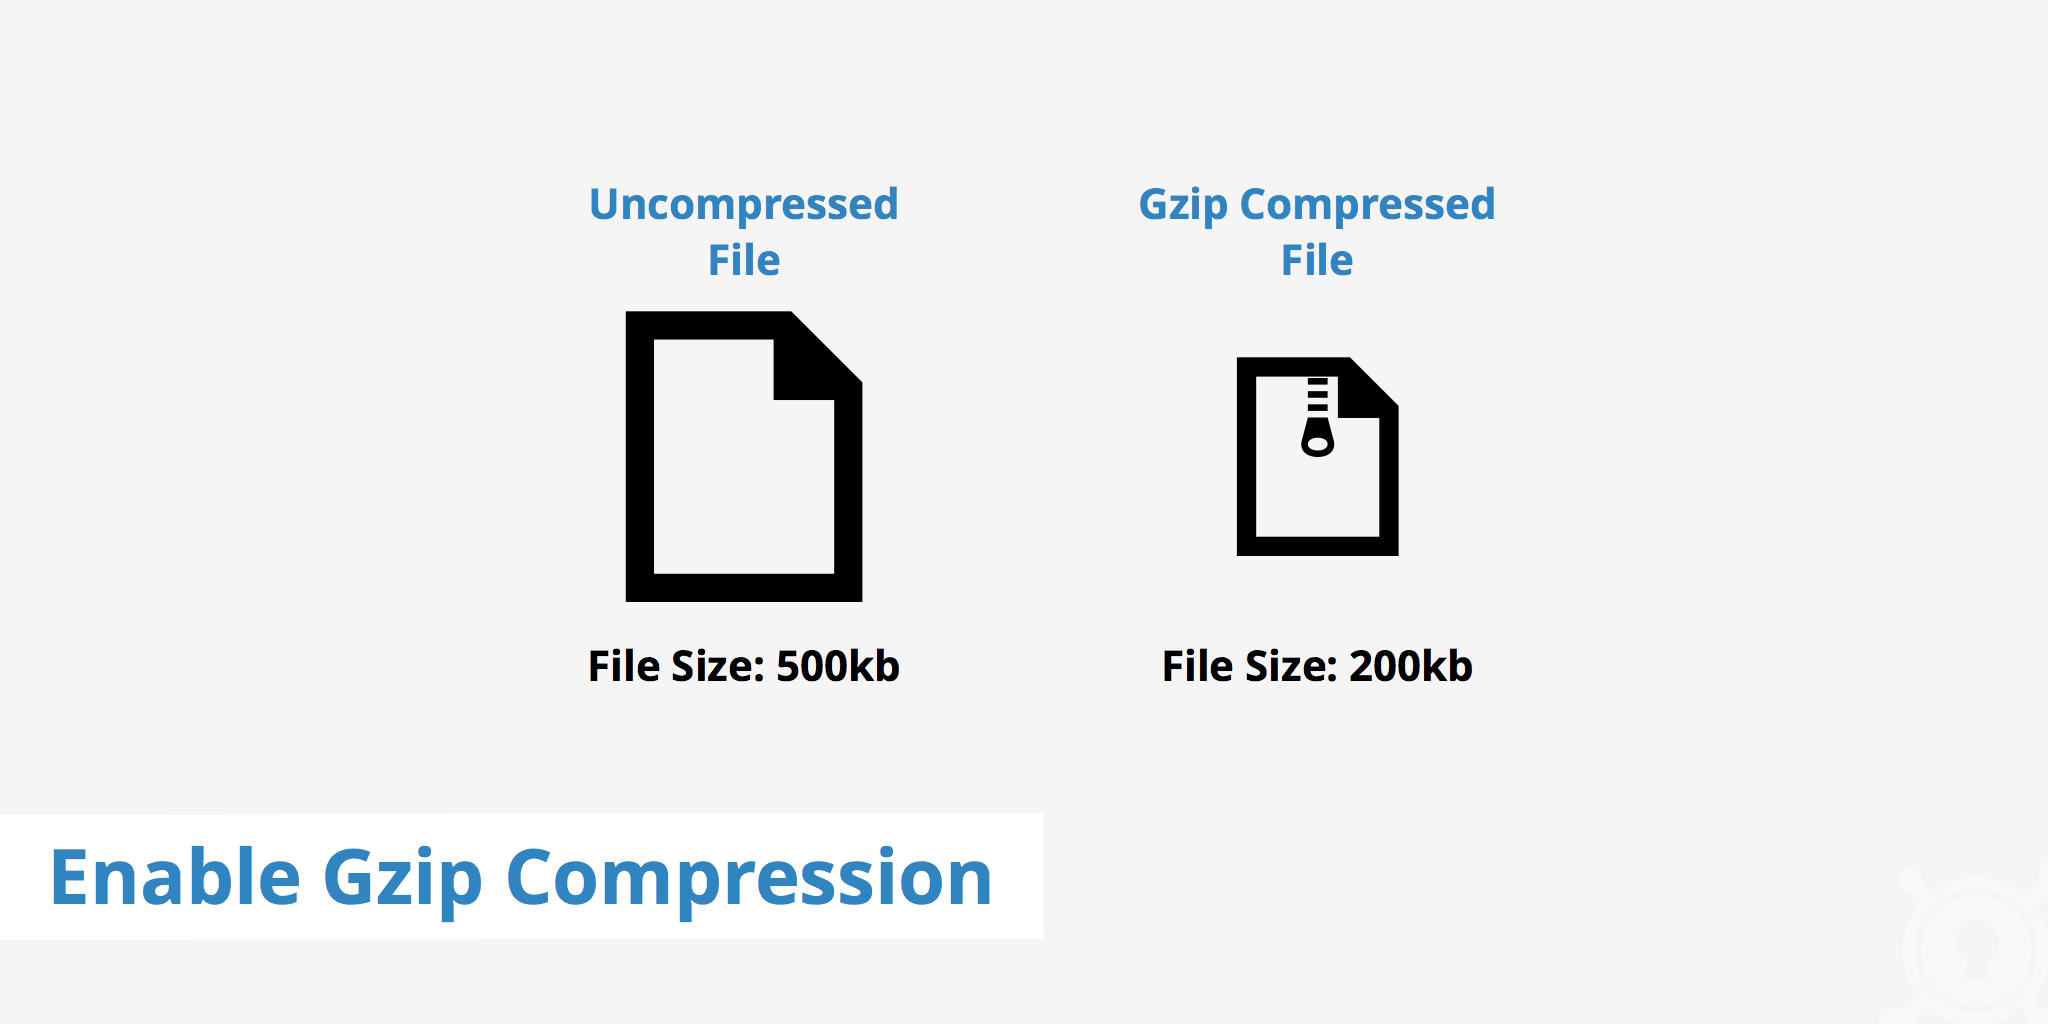 Enable Gzip Compression - Configuration for Nginx and Apache